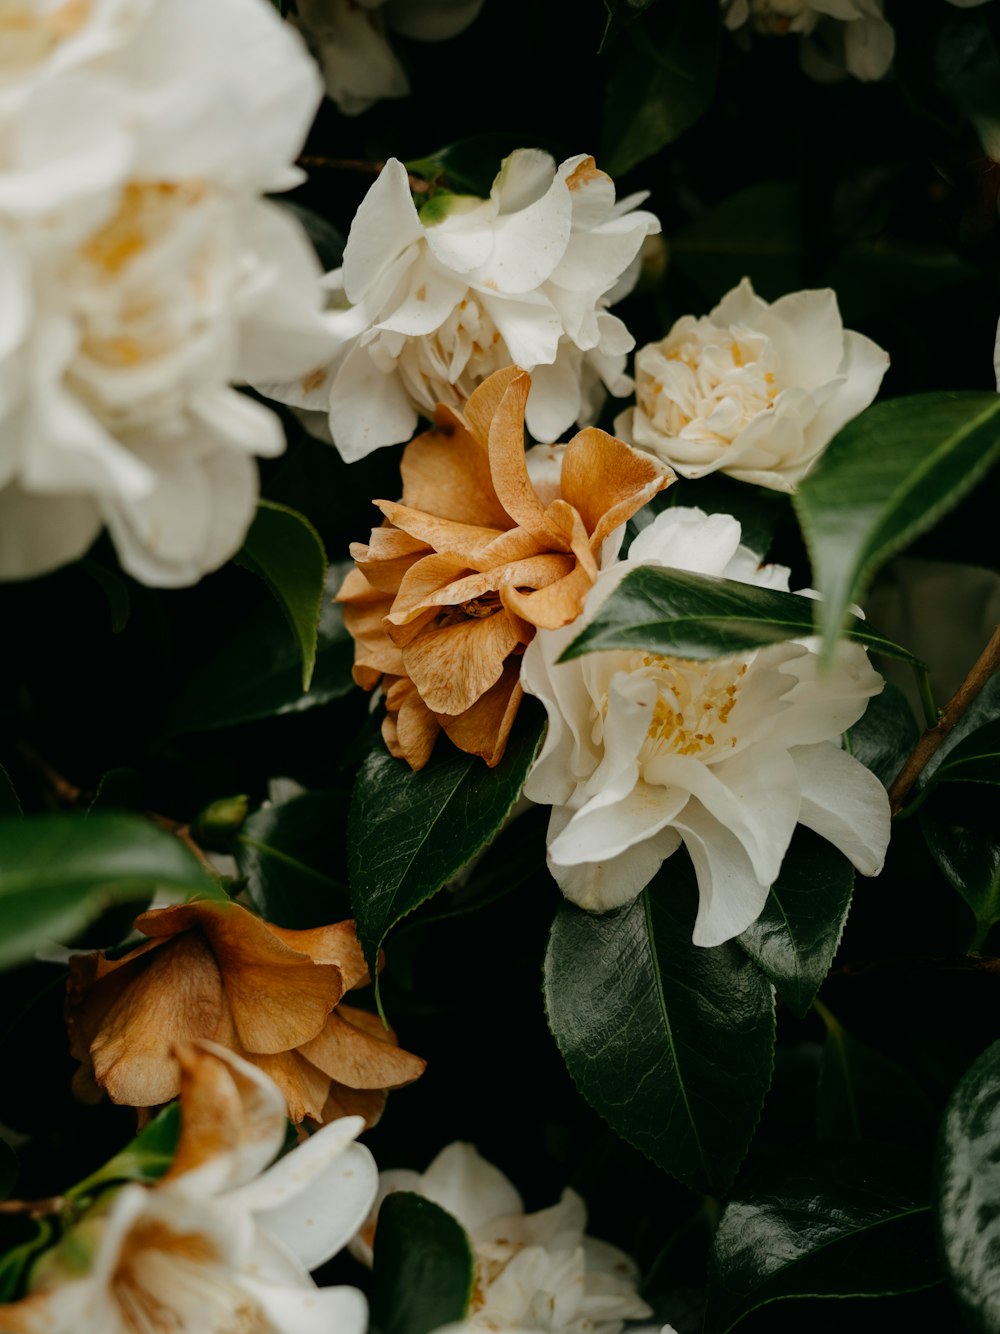 a bunch of white and orange flowers with green leaves